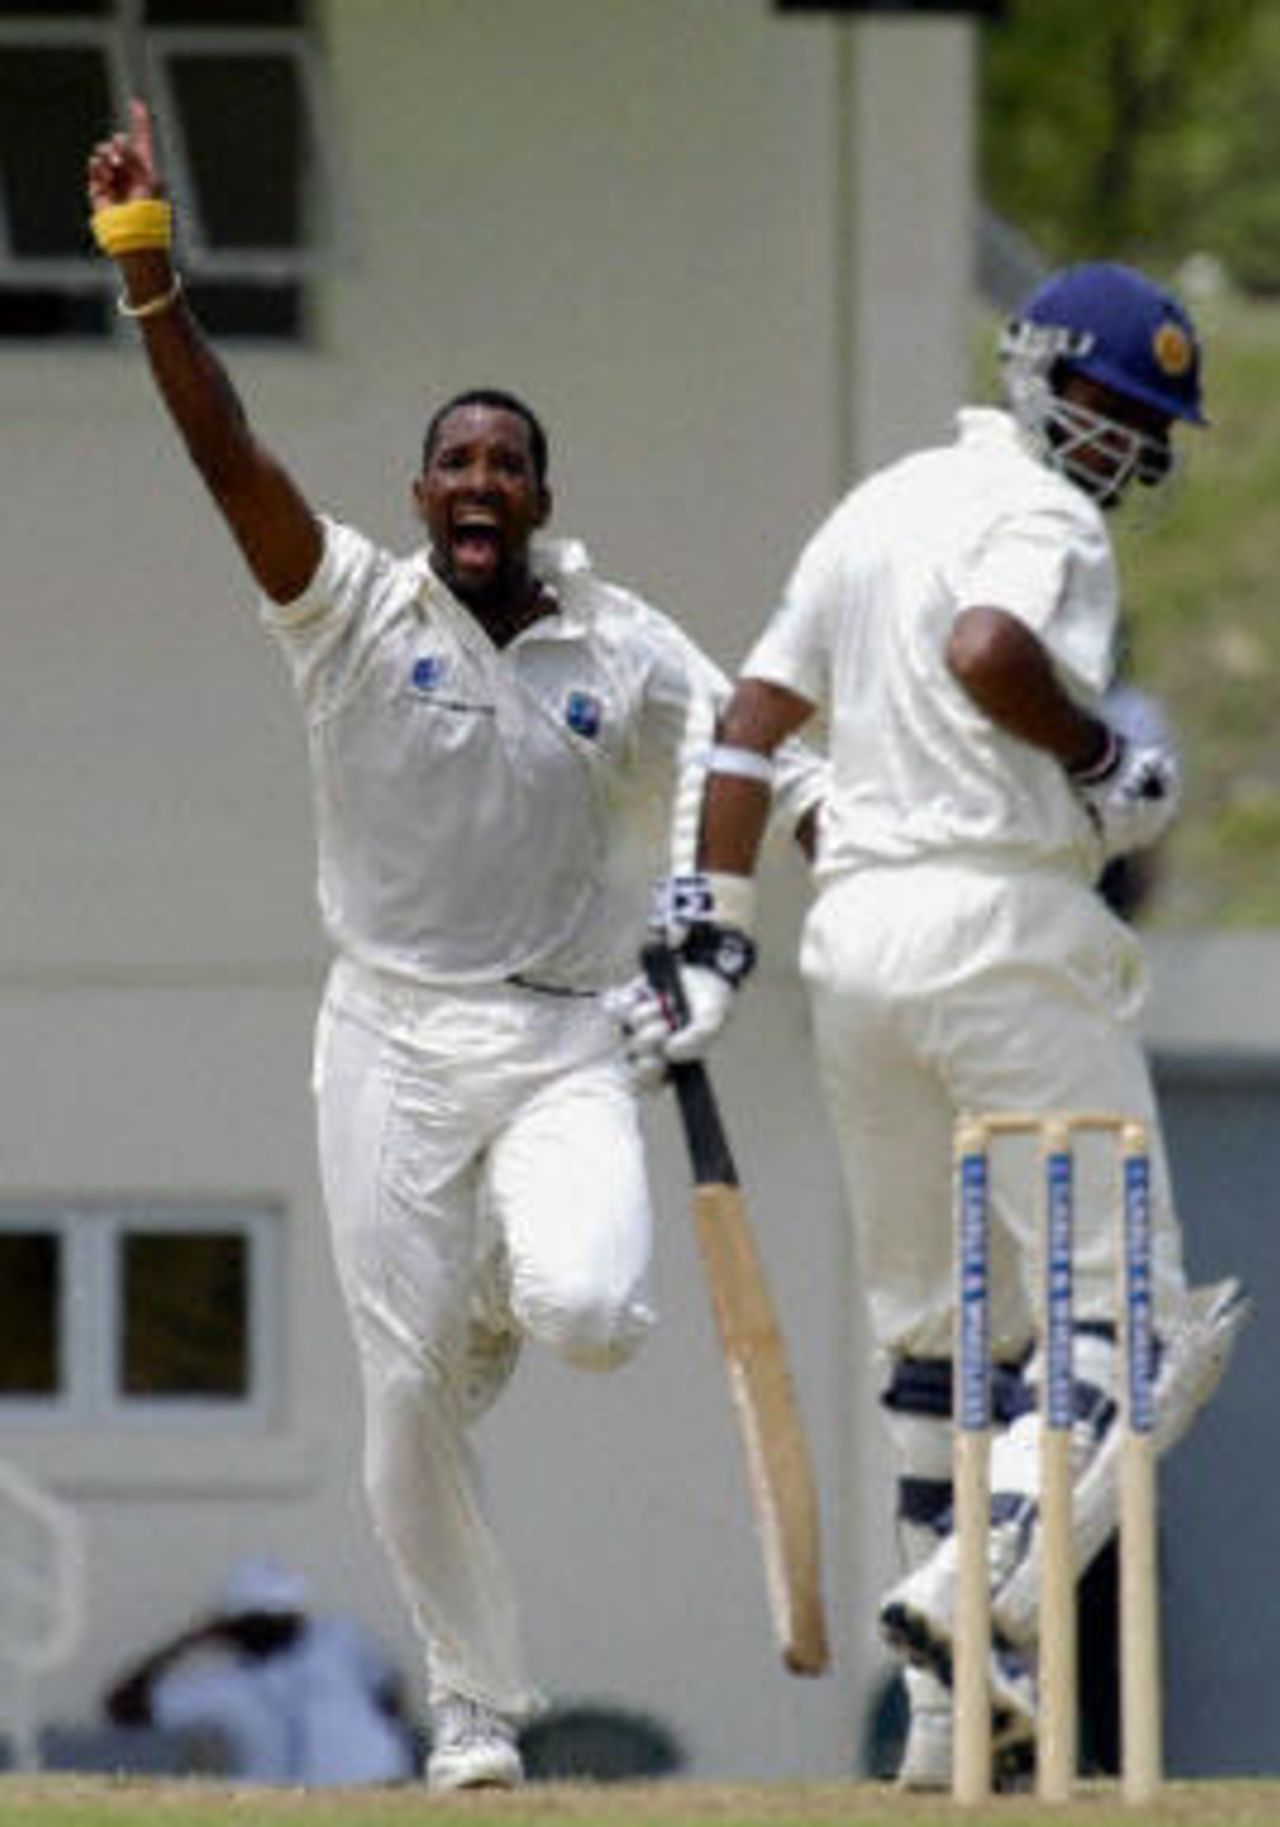 Corey Collymore celebrates wicket of Thilan Samaraweera caught by wicket keeper Ridley Jacobs first Test match between Sri Lanka and West Indies at St Lucia.